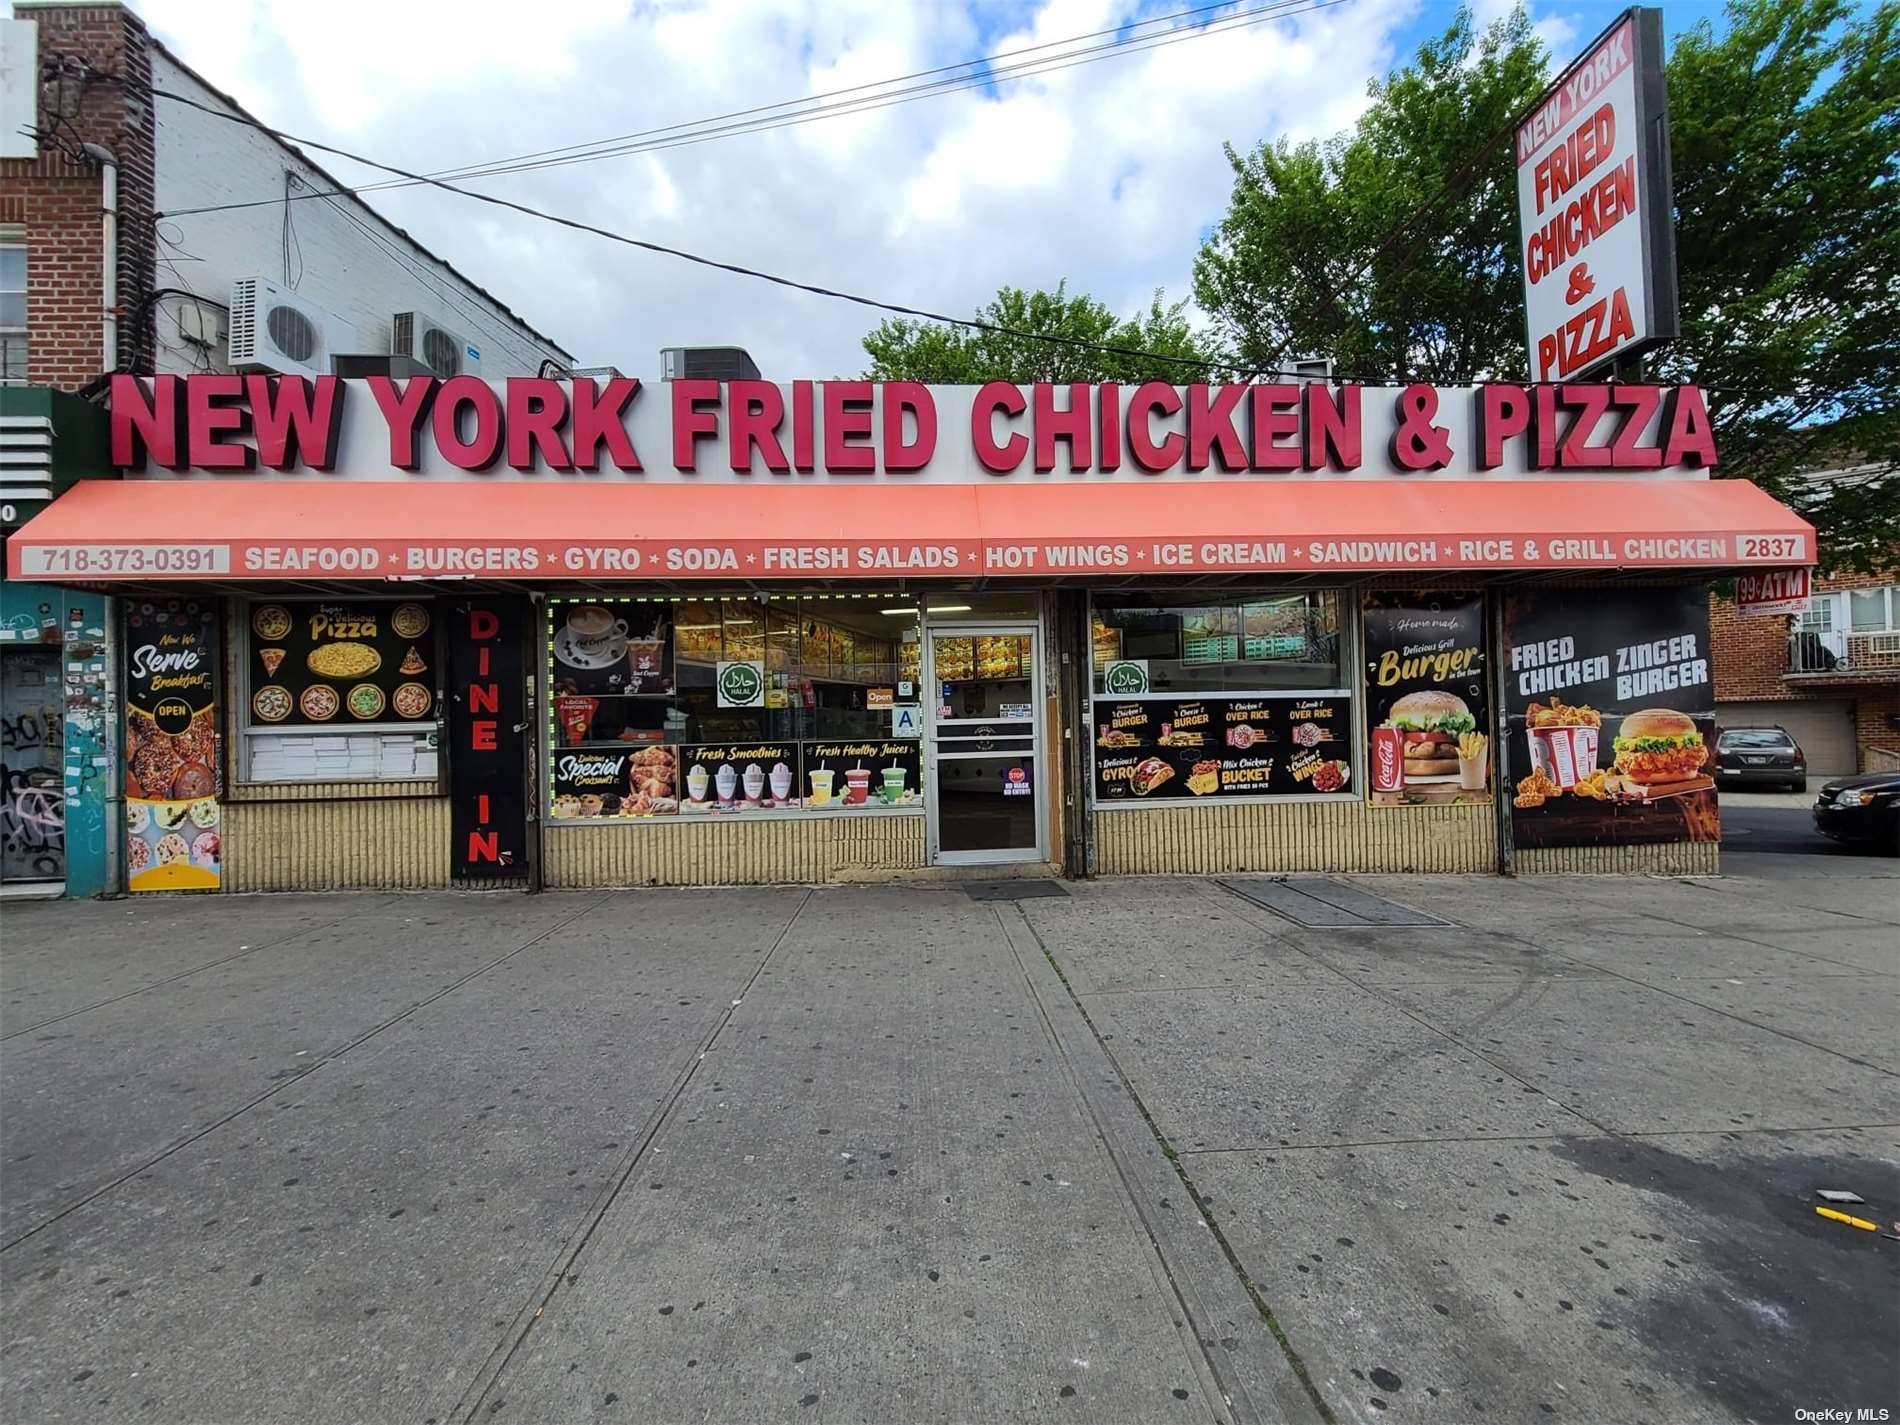 New York Fried Chicken amp ; Pizza For Sale, Turnkey Business Ready For New Ownership.